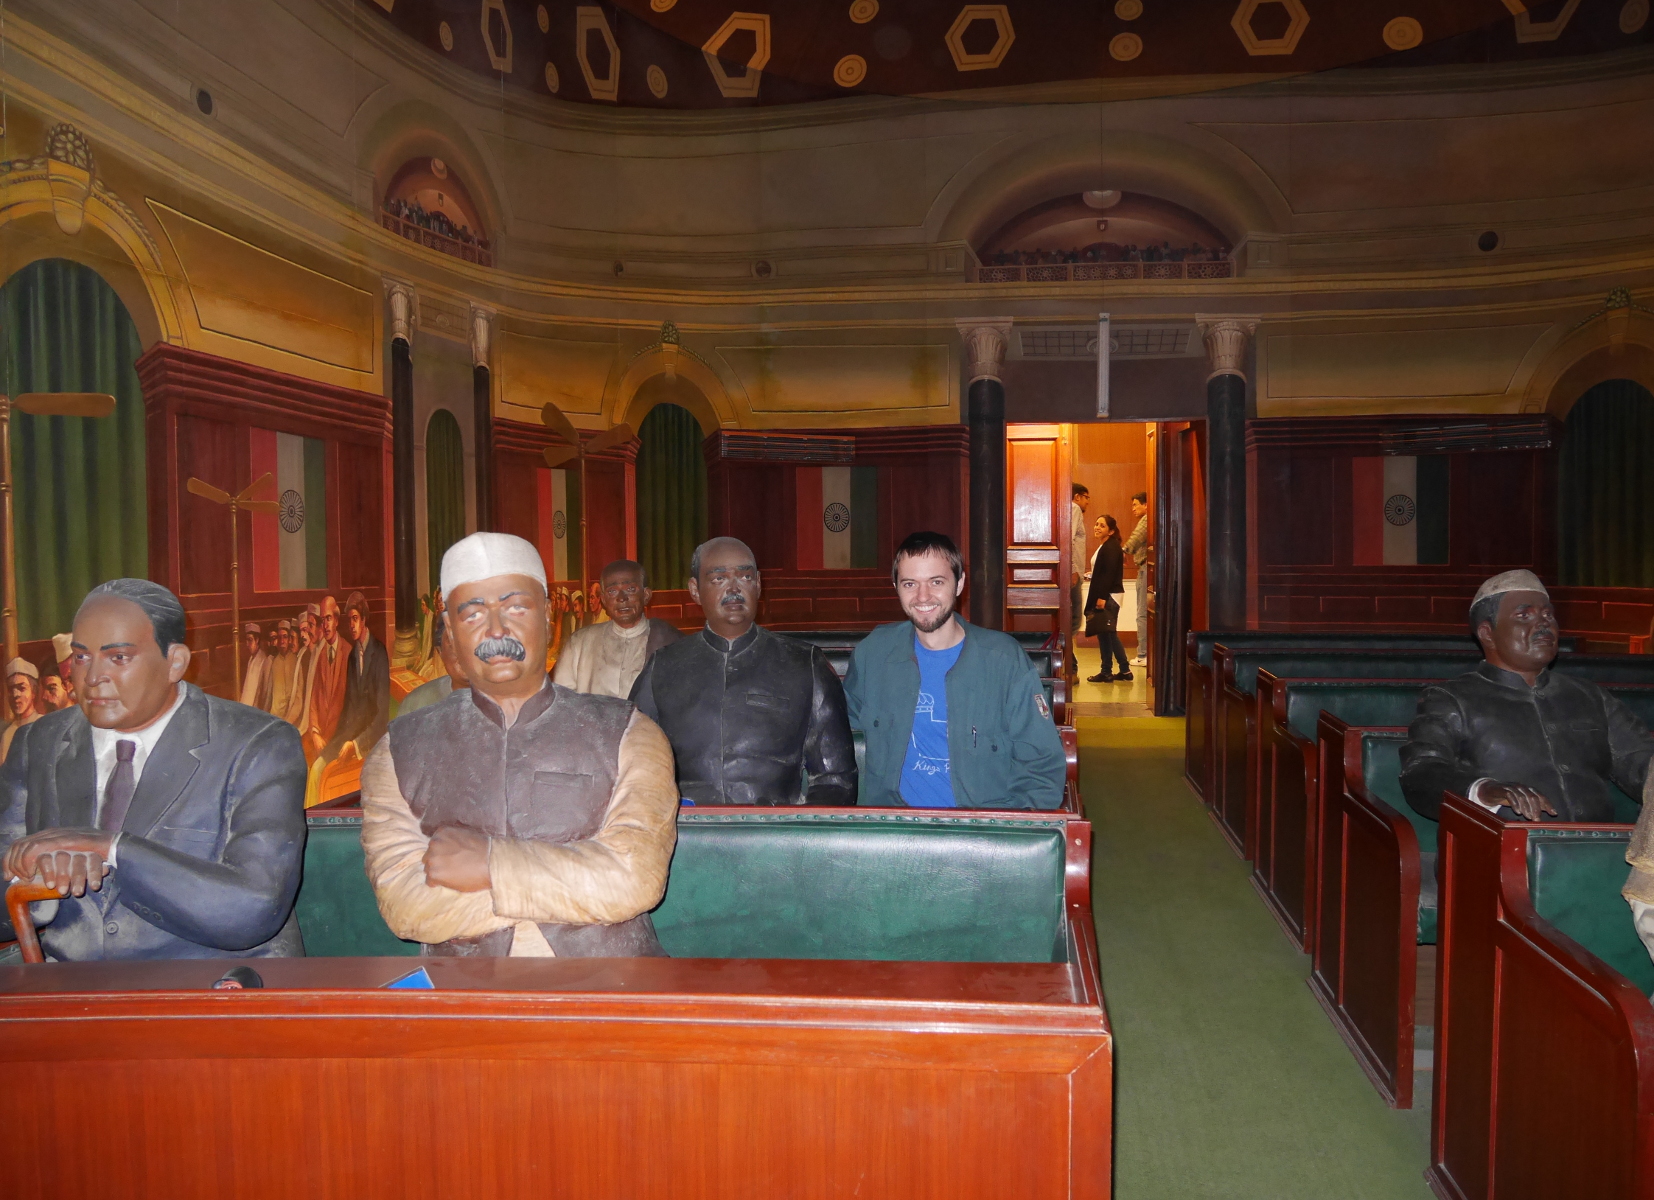 Surreal Lok Sabha replica, with trompe-l'oeil walls, mannequins of MPs, and spots on the benches for real people to sit too. I really hope this is preserved in any remodeling of the museum